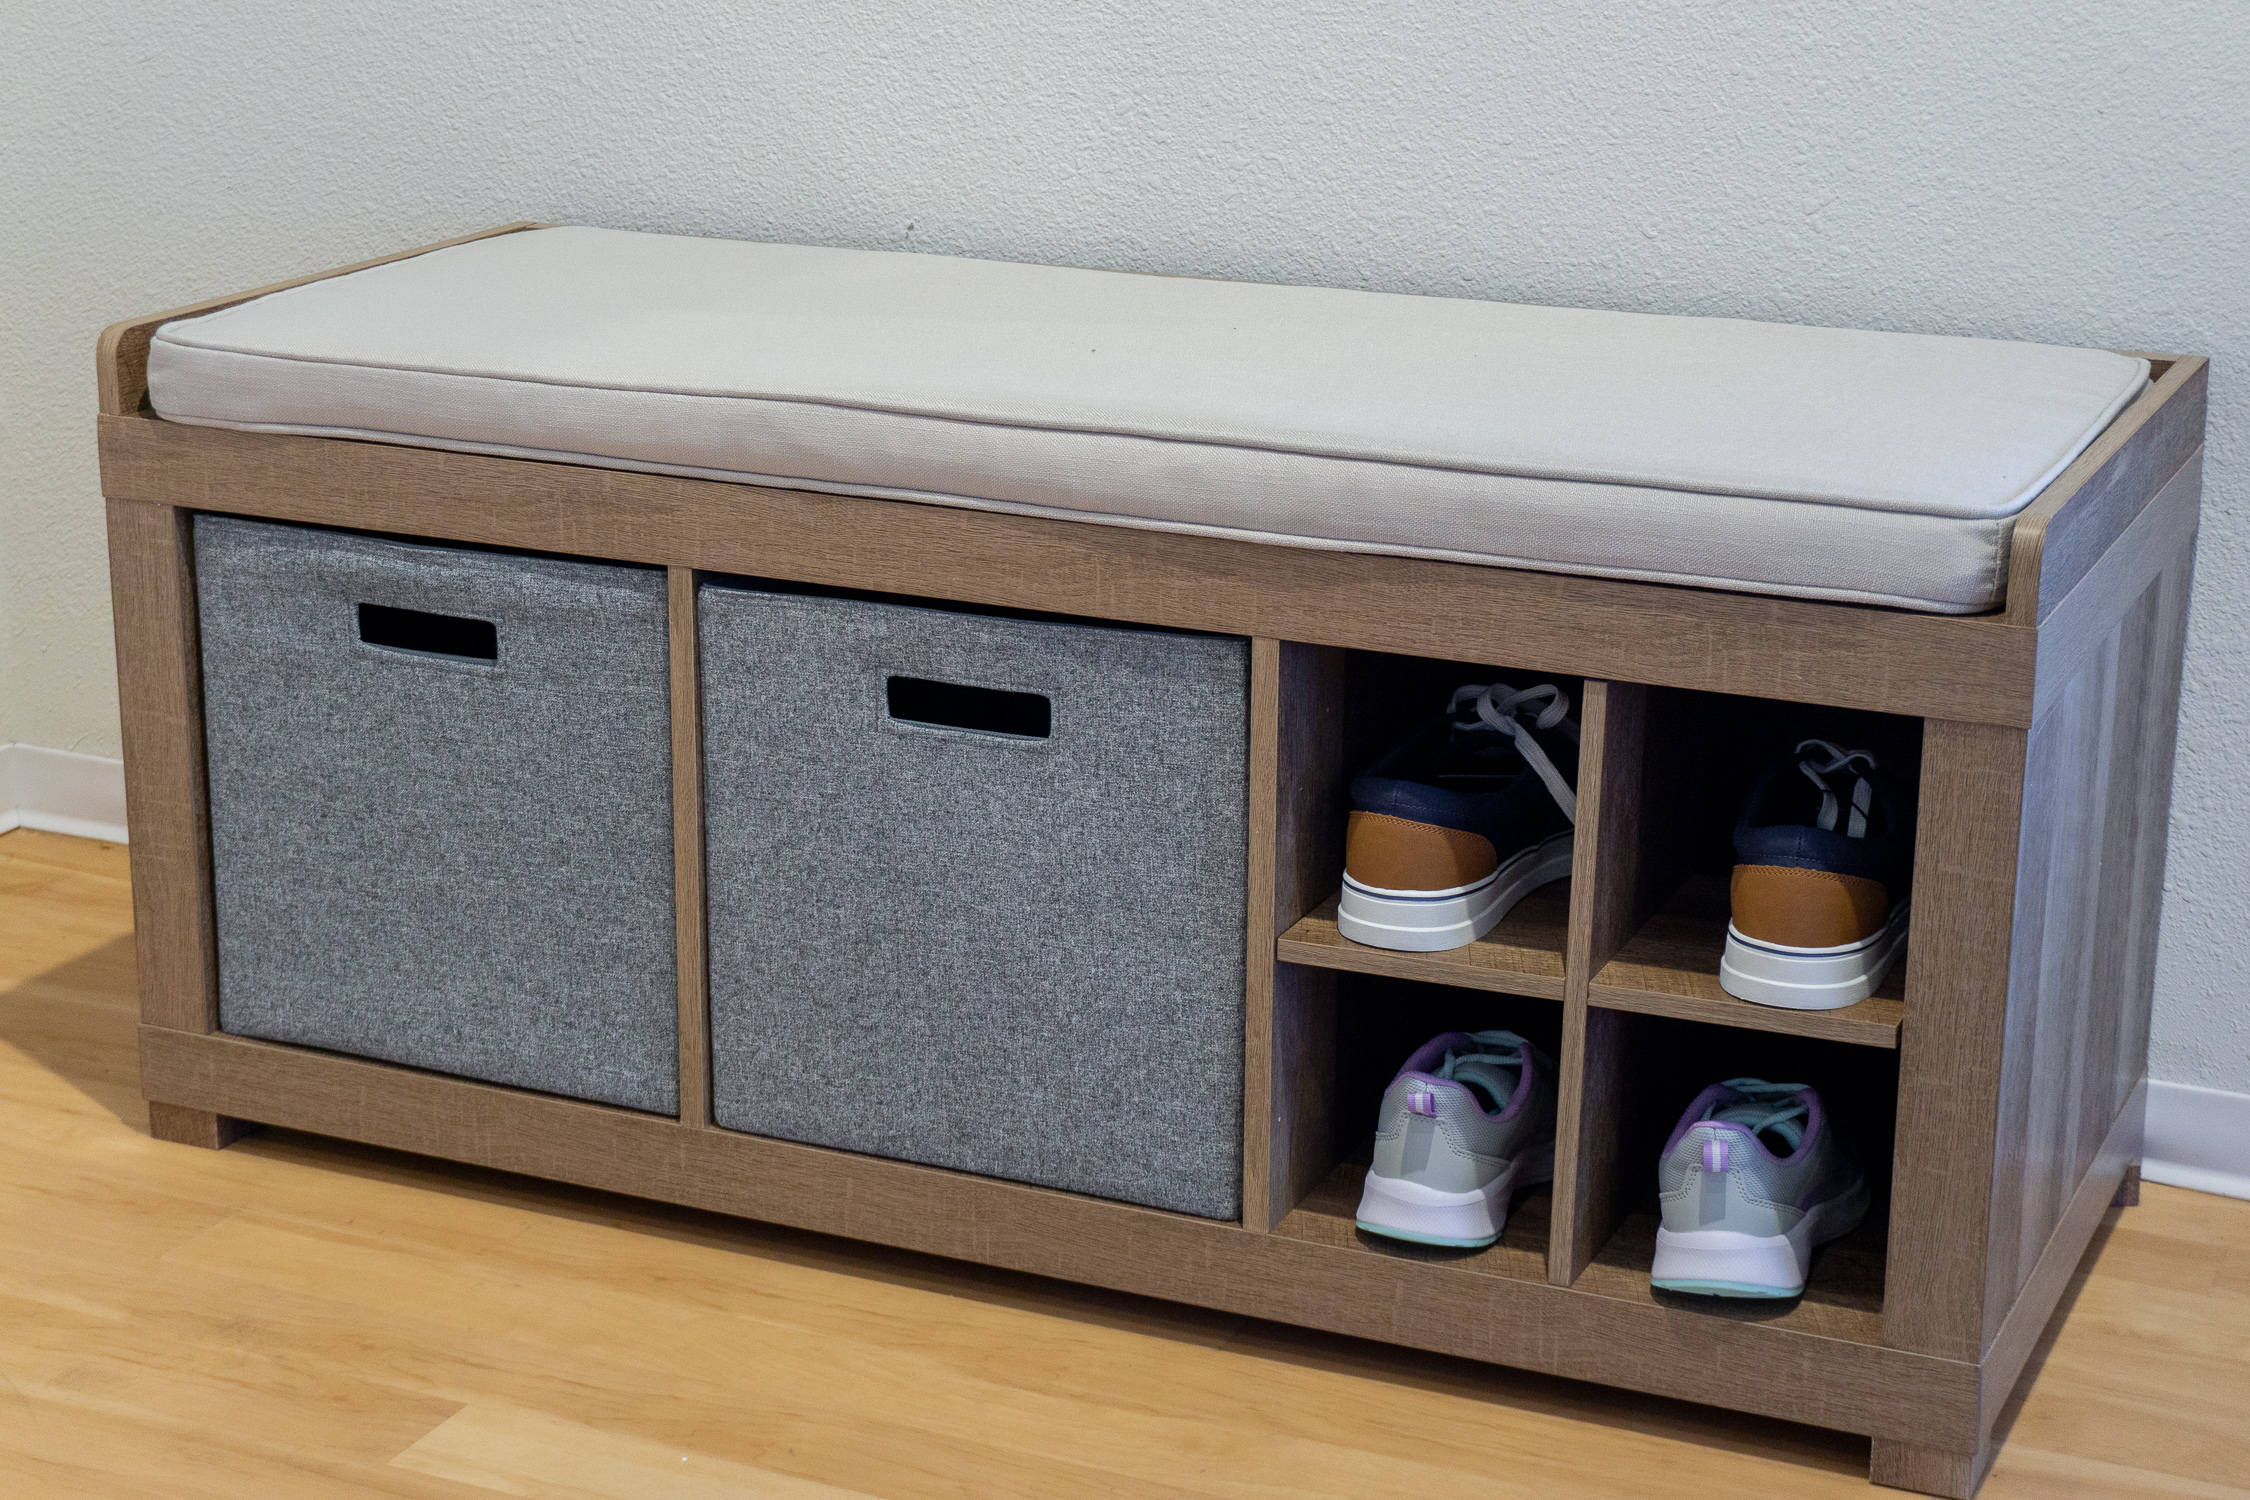 Better Homes & Gardens 3-Cube Shoe Storage Bench, Weathered - image 7 of 9